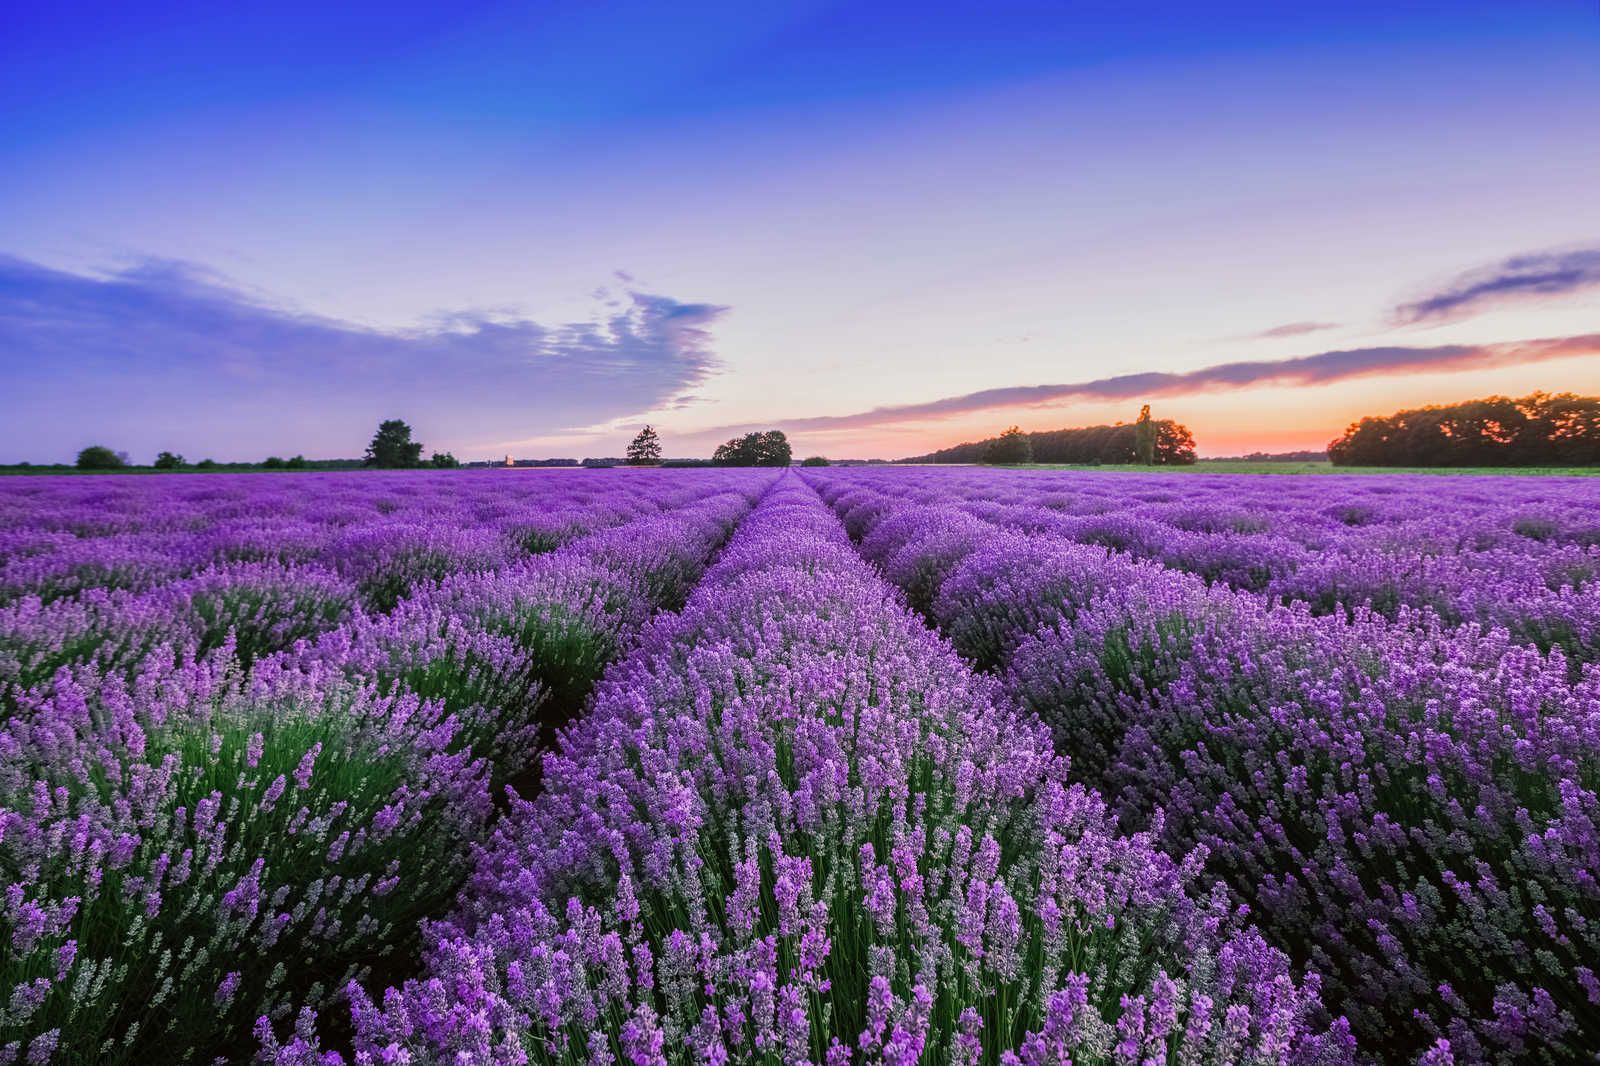             Canvas painting Lavender Field at Sunset - 0,90 m x 0,60 m
        